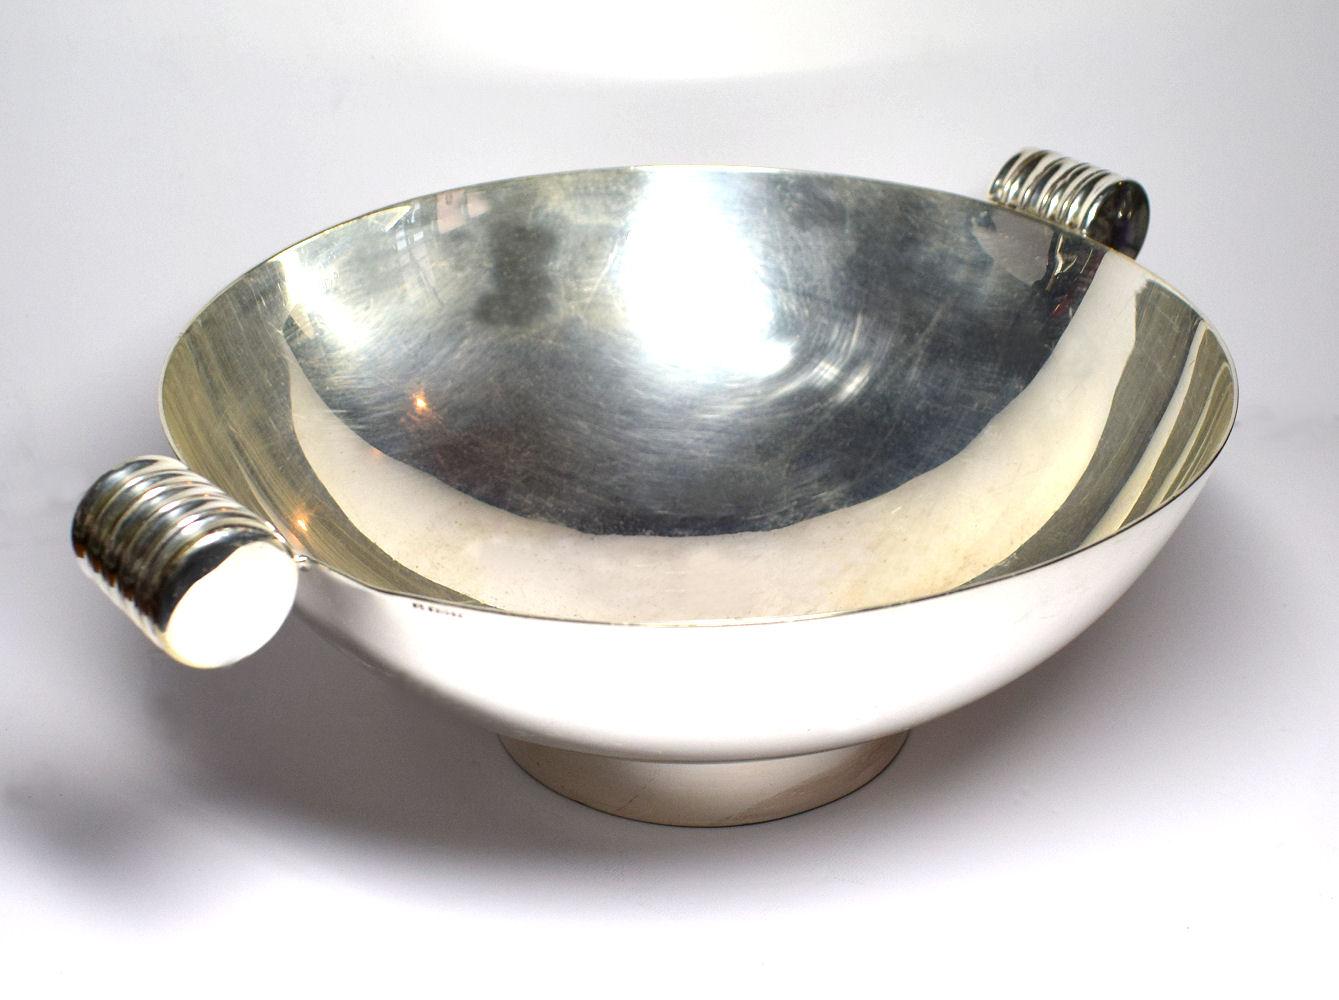 Stylish 1930s modernist Art Deco bowl in silver plate with the stamped registration number and EPNS markings which read EPNS B&H A1 Patrican. the simplicity in the design of this bowl gives the flavour of sophistication we all admire. Nice size to